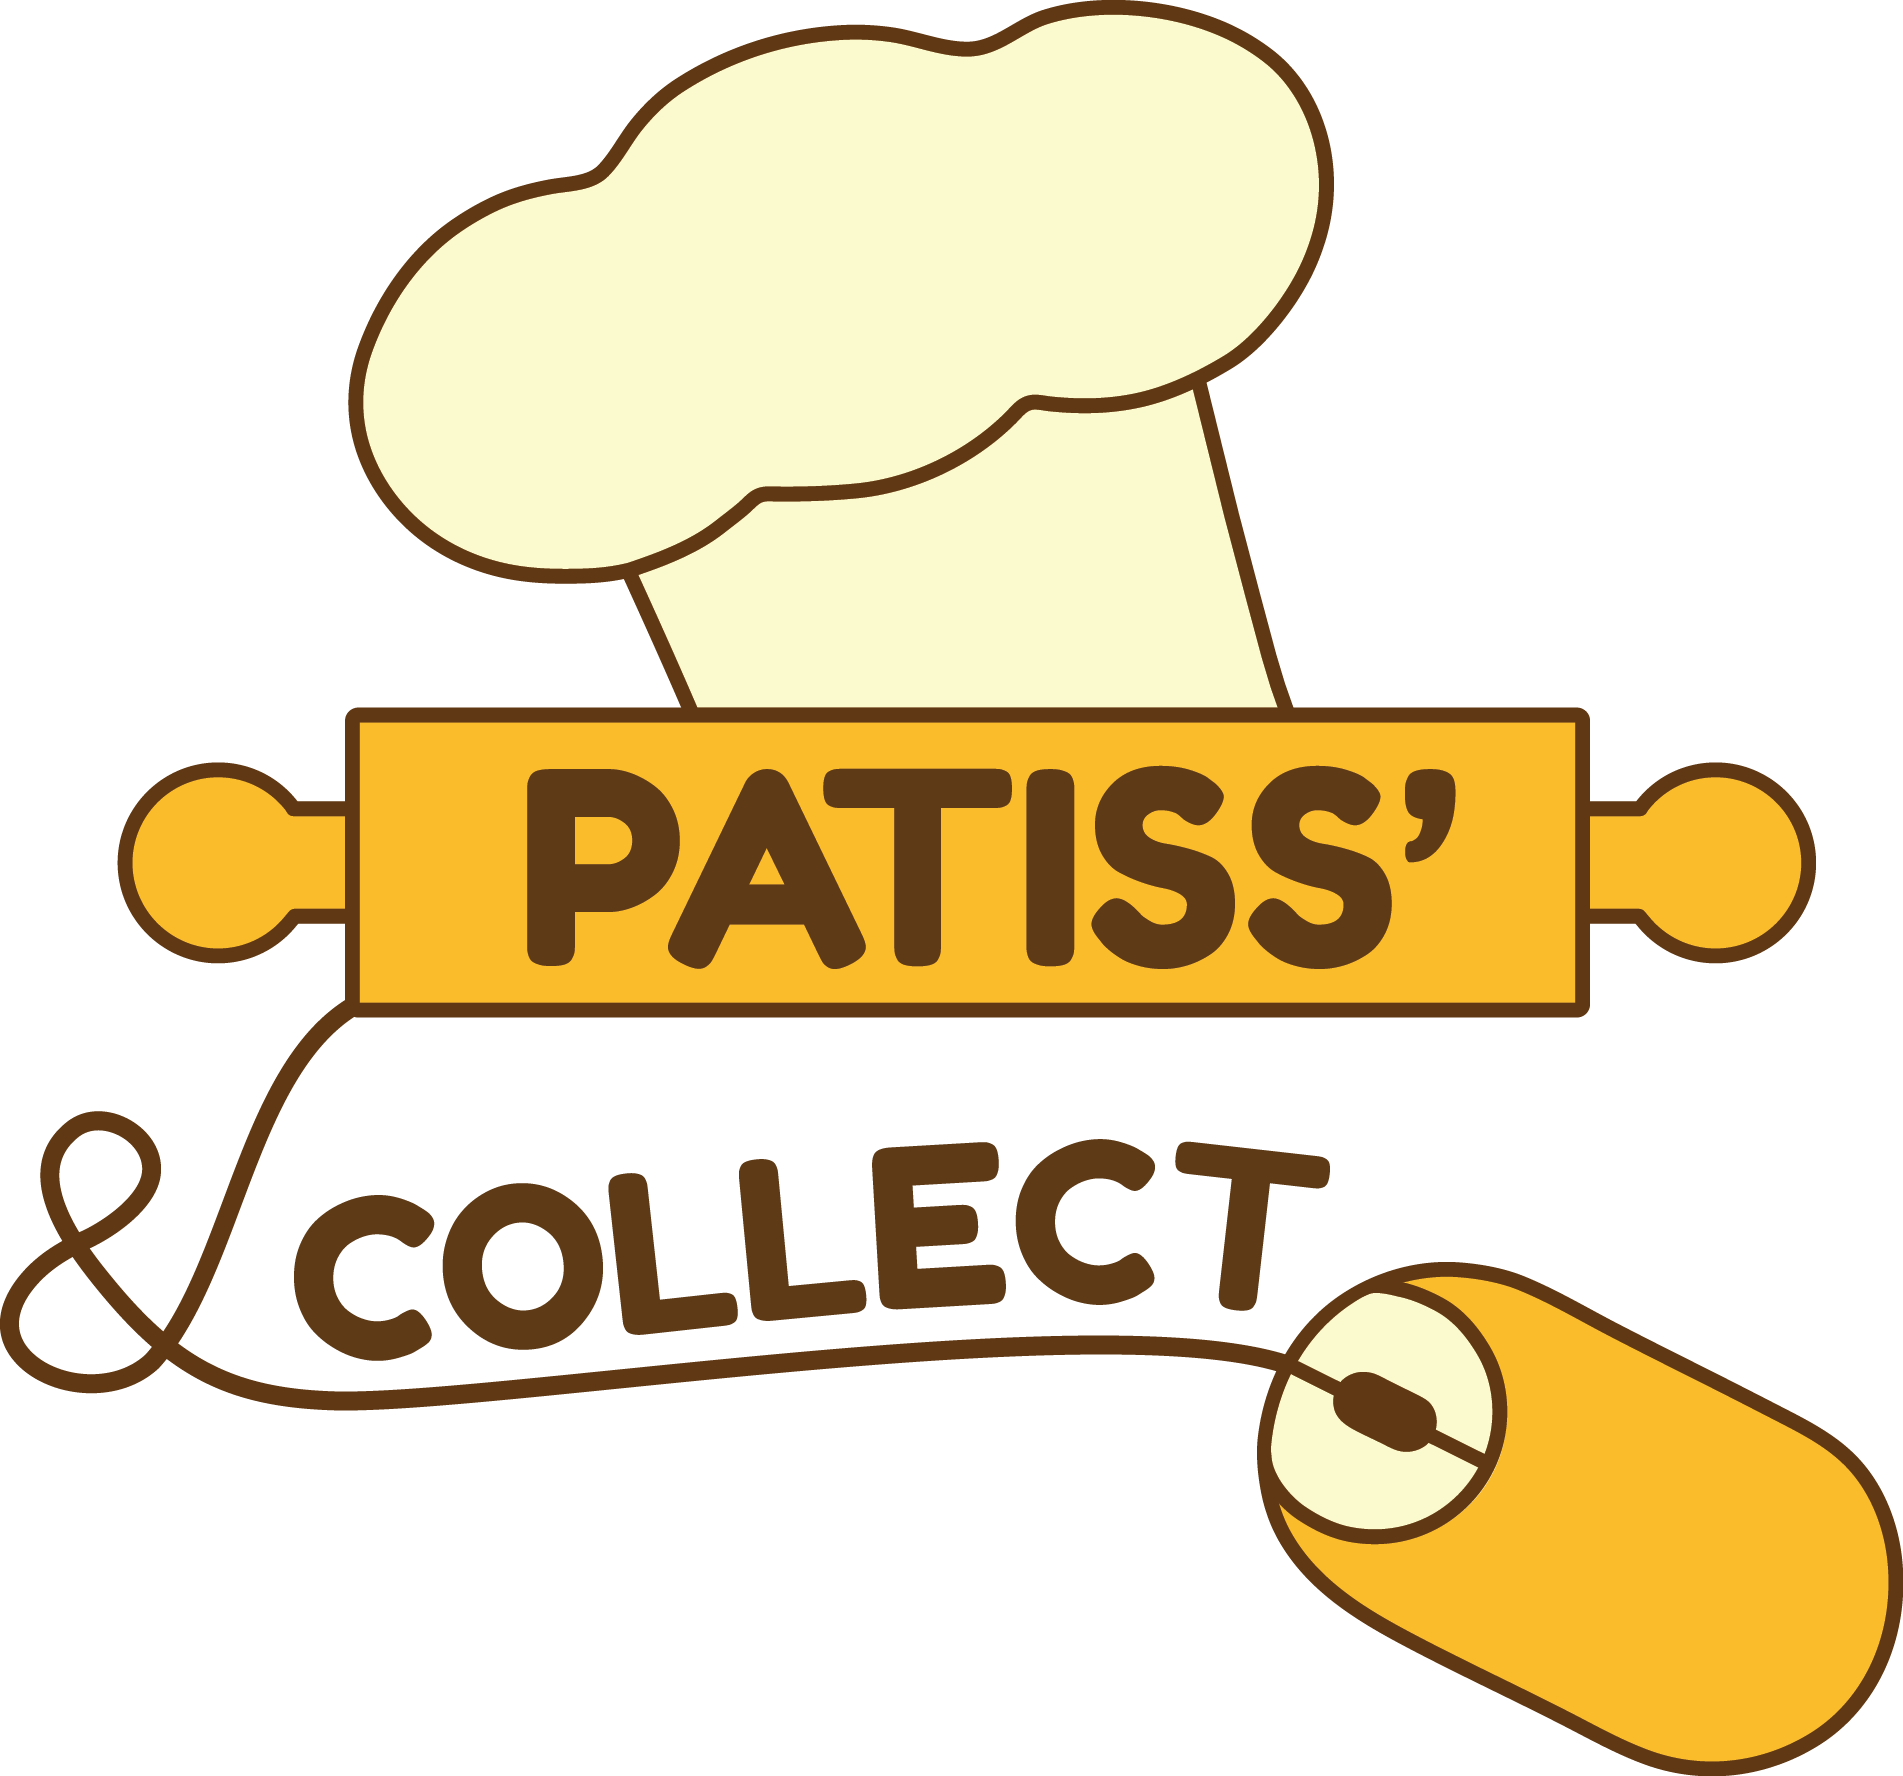 Patiss & Collect